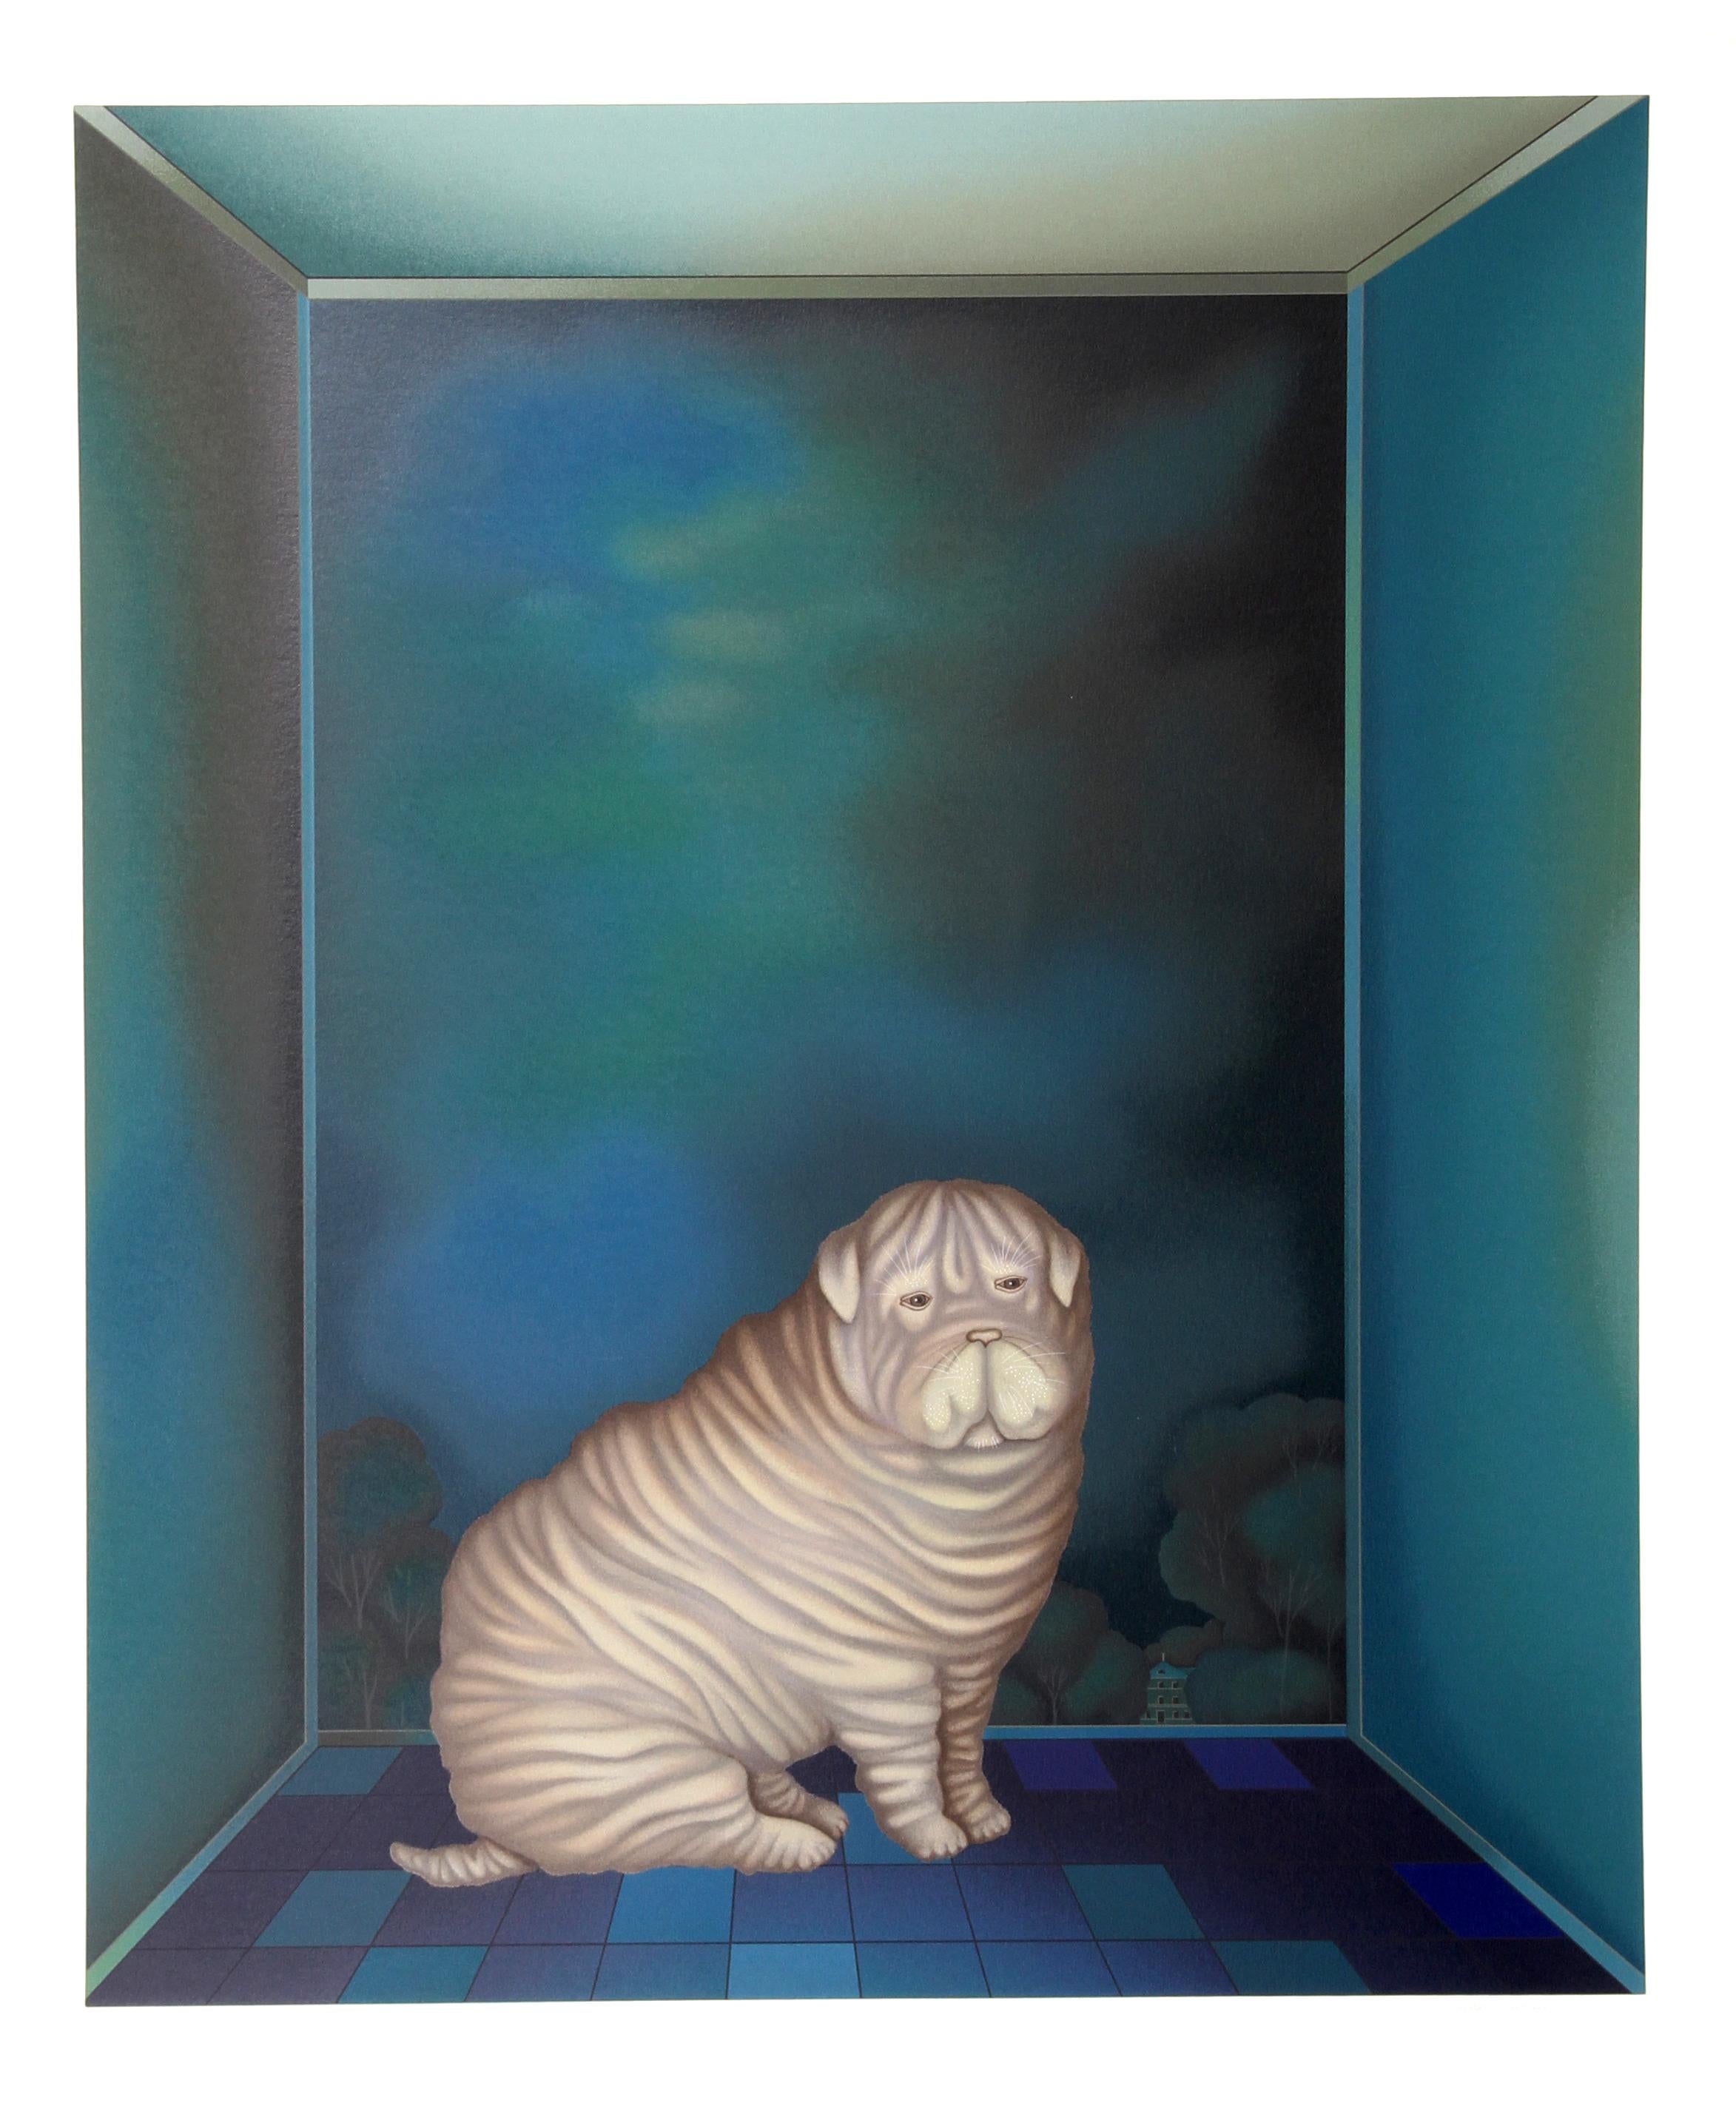 Artist: Igor Galanin, Russian/American (1937 -  )
Title: Shar-Pei 
Year: circa 1985 
Medium: Serigraph, signed and numbered in pencil
Edition: 50
Paper Size: 42.5 in. x 35.5 in. (107.95 cm x 90.17 cm)